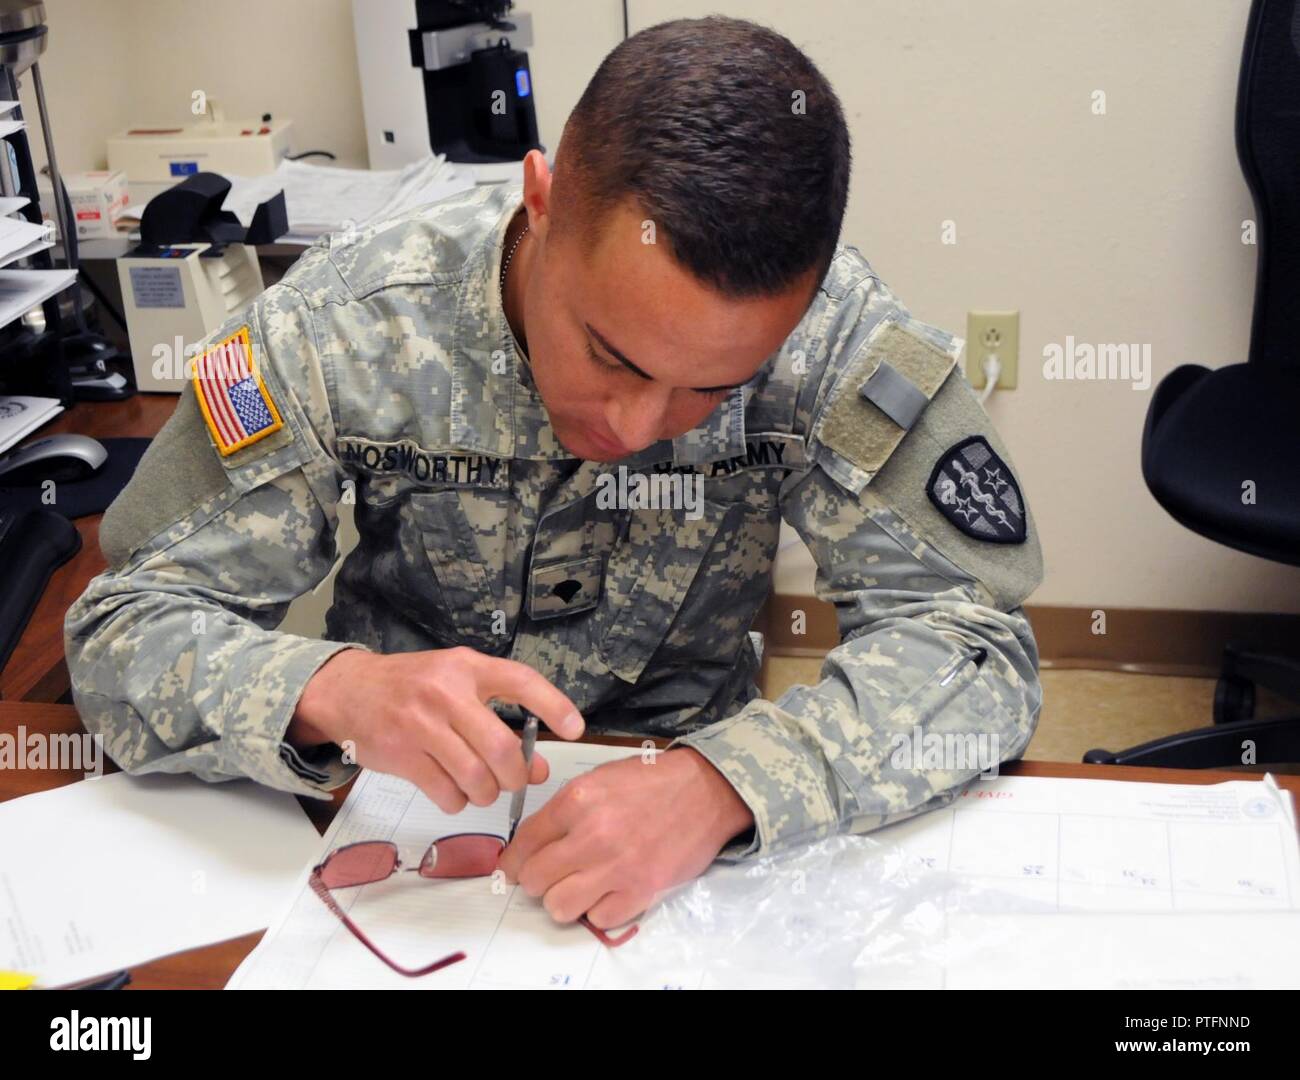 Spc. John Nosworthy, an eye specialist assigned to Army Reserve Medical Command’s 7239th Medical Support Unit located in Chattanooga, Tennessee, repairs eyeglasses in support of the optometry section for Chief Redstone Health Clinic located in Wolf Point, Montana.  Nosworthy is one of a little over 25 U.S. Army Reserve Soldiers who are working in partnership with Fort Peck Indian Health Service to provide medical care to the local tribal population. The Indian Health Service provides preventive, curative, and community health care for approximately 2.2 million American Indians and Alaska Nativ Stock Photo